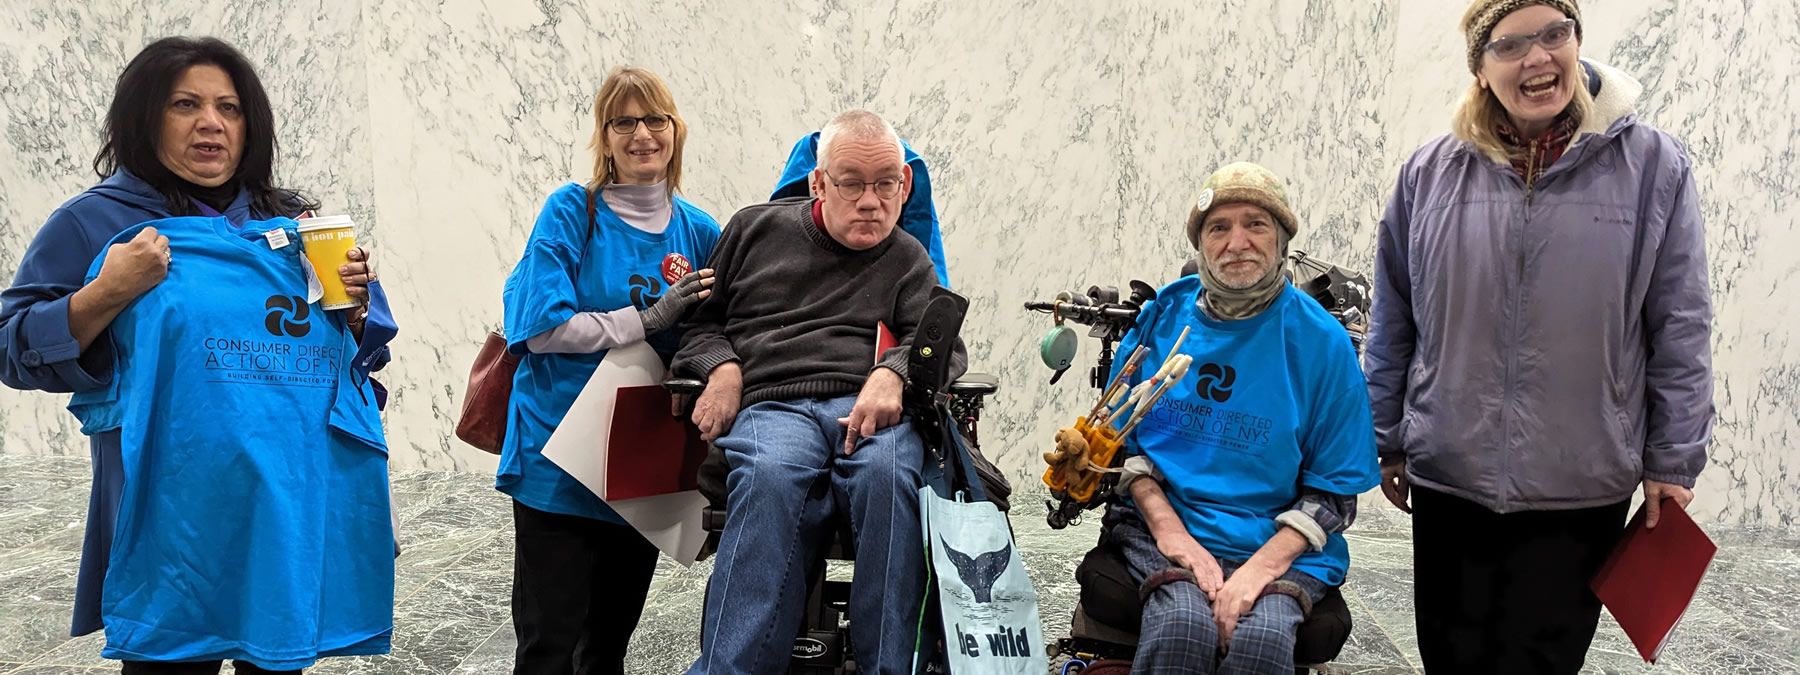 Two people in wheelchairs with three people standing.